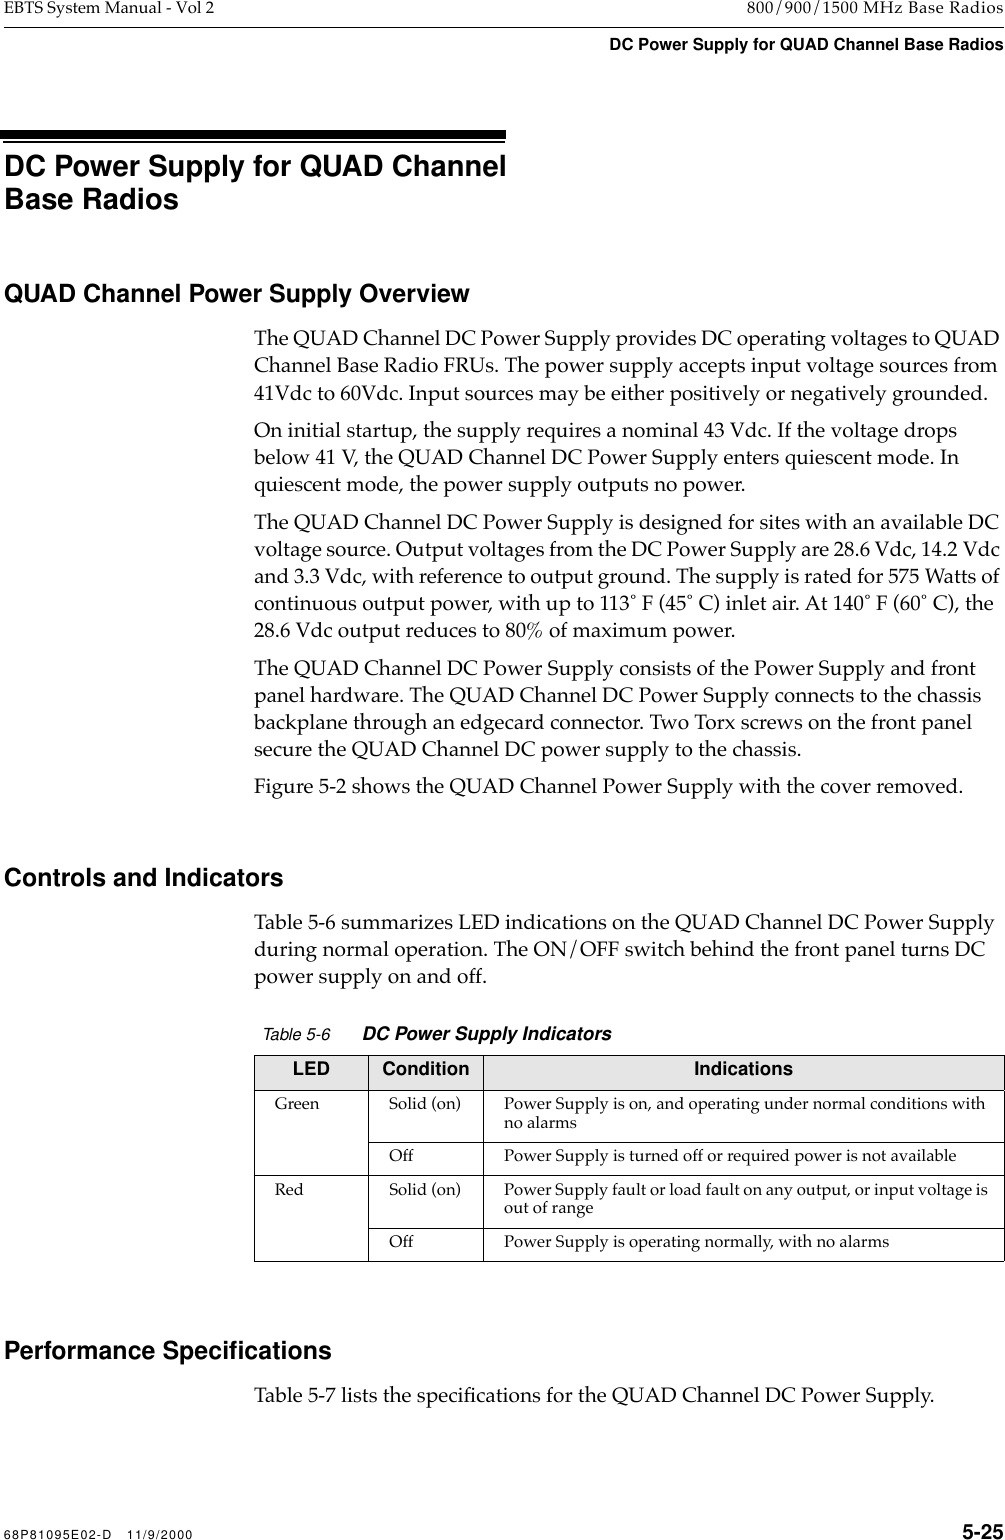  68P81095E02-D   11/9/2000 5-25 EBTS System Manual - Vol 2 800/900/1500 MHz Base Radios DC Power Supply for QUAD Channel Base Radios   DC Power Supply for QUAD Channel Base Radios QUAD Channel Power Supply Overview The QUAD Channel DC Power Supply provides DC operating voltages to QUAD Channel Base Radio FRUs. The power supply accepts input voltage sources from 41Vdc to 60Vdc. Input sources may be either positively or negatively grounded.On initial startup, the supply requires a nominal 43 Vdc. If the voltage drops below 41 V, the QUAD Channel DC Power Supply enters quiescent mode. In quiescent mode, the power supply outputs no power.The QUAD Channel DC Power Supply is designed for sites with an available DC voltage source. Output voltages from the DC Power Supply are 28.6 Vdc, 14.2 Vdc and 3.3 Vdc, with reference to output ground. The supply is rated for 575 Watts of continuous output power, with up to 113û F (45û C) inlet air. At 140û F (60û C), the 28.6 Vdc output reduces to 80% of maximum power. The QUAD Channel DC Power Supply consists of the Power Supply and front panel hardware. The QUAD Channel DC Power Supply connects to the chassis backplane through an edgecard connector. Two Torx screws on the front panel secure the QUAD Channel DC power supply to the chassis.Figure 5-2 shows the QUAD Channel Power Supply with the cover removed. Controls and Indicators Table 5-6 summarizes LED indications on the QUAD Channel DC Power Supply during normal operation. The ON/OFF switch behind the front panel turns DC power supply on and off. Performance Speciﬁcations  Table 5-7 lists the speciÞcations for the QUAD Channel DC Power Supply. Table 5-6 DC Power Supply Indicators LED Condition Indications Green Solid (on) Power Supply is on, and operating under normal conditions with no alarmsOff Power Supply is turned off or required power is not availableRed Solid (on) Power Supply fault or load fault on any output, or input voltage is out of rangeOff Power Supply is operating normally, with no alarms